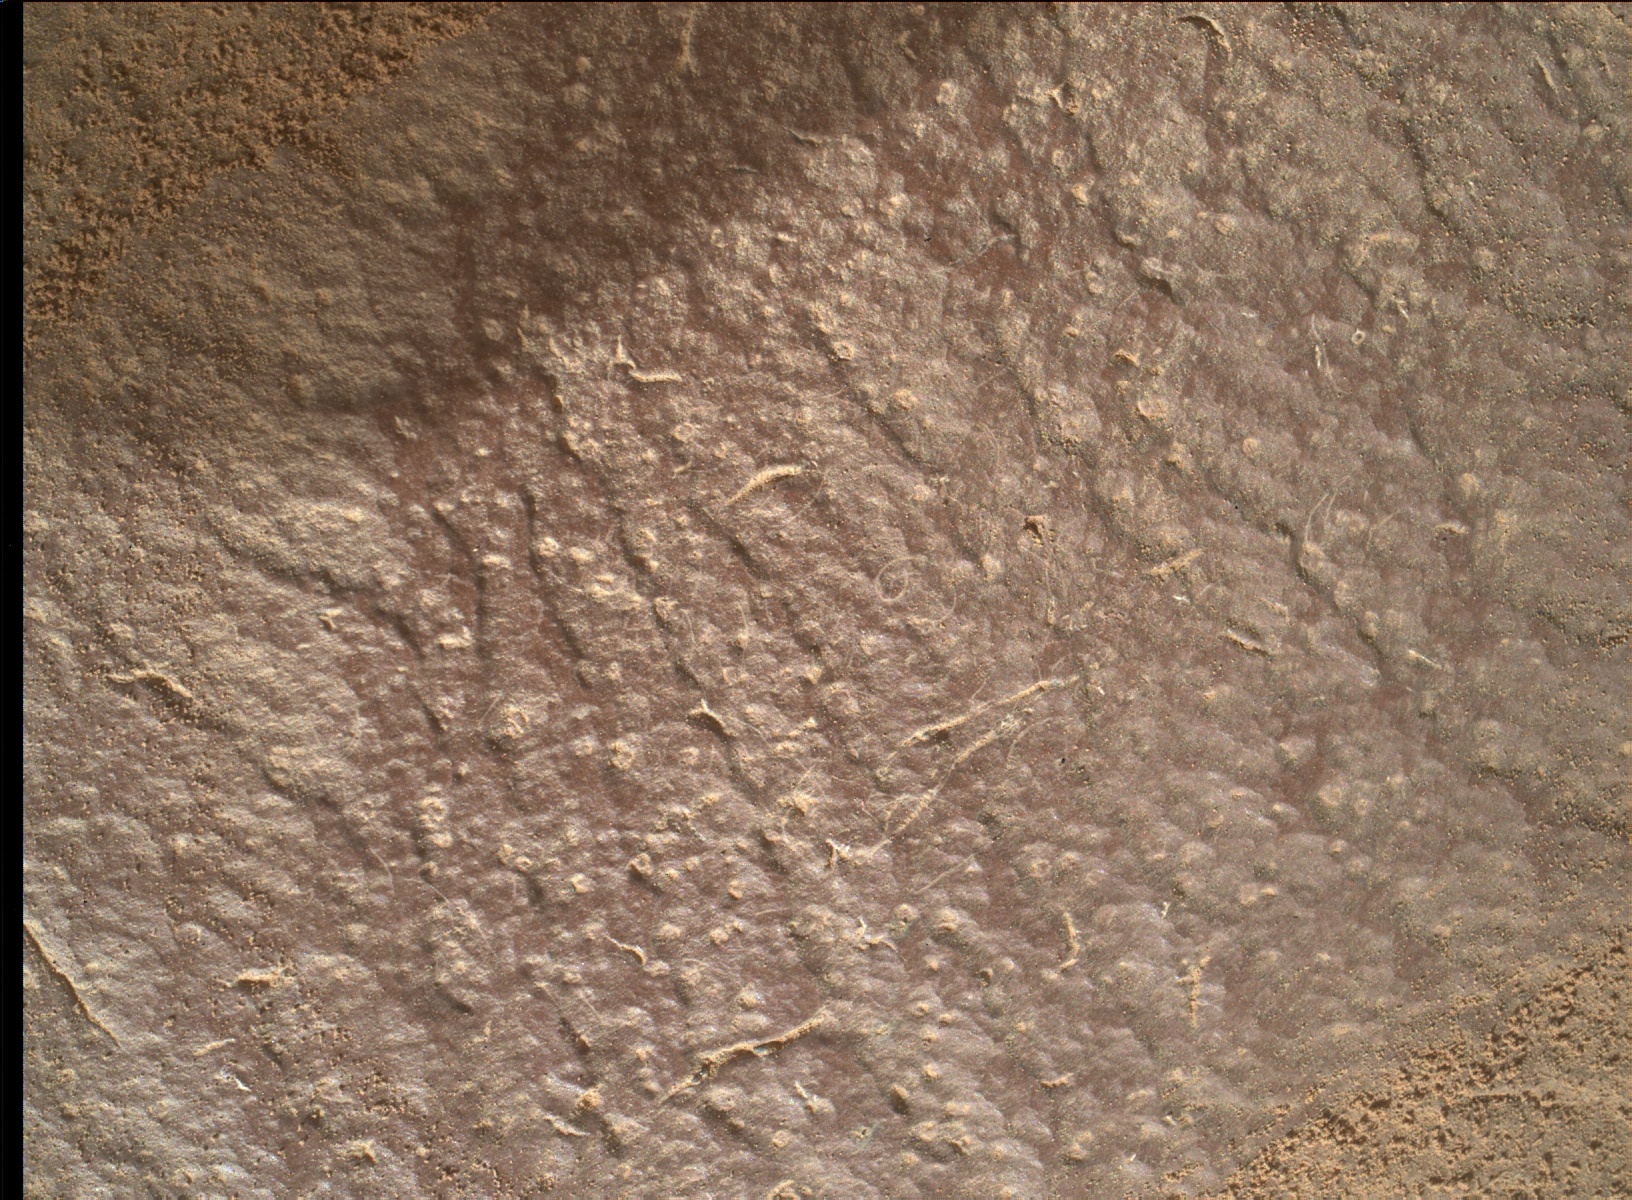 Nasa's Mars rover Curiosity acquired this image using its Mars Hand Lens Imager (MAHLI) on Sol 1416